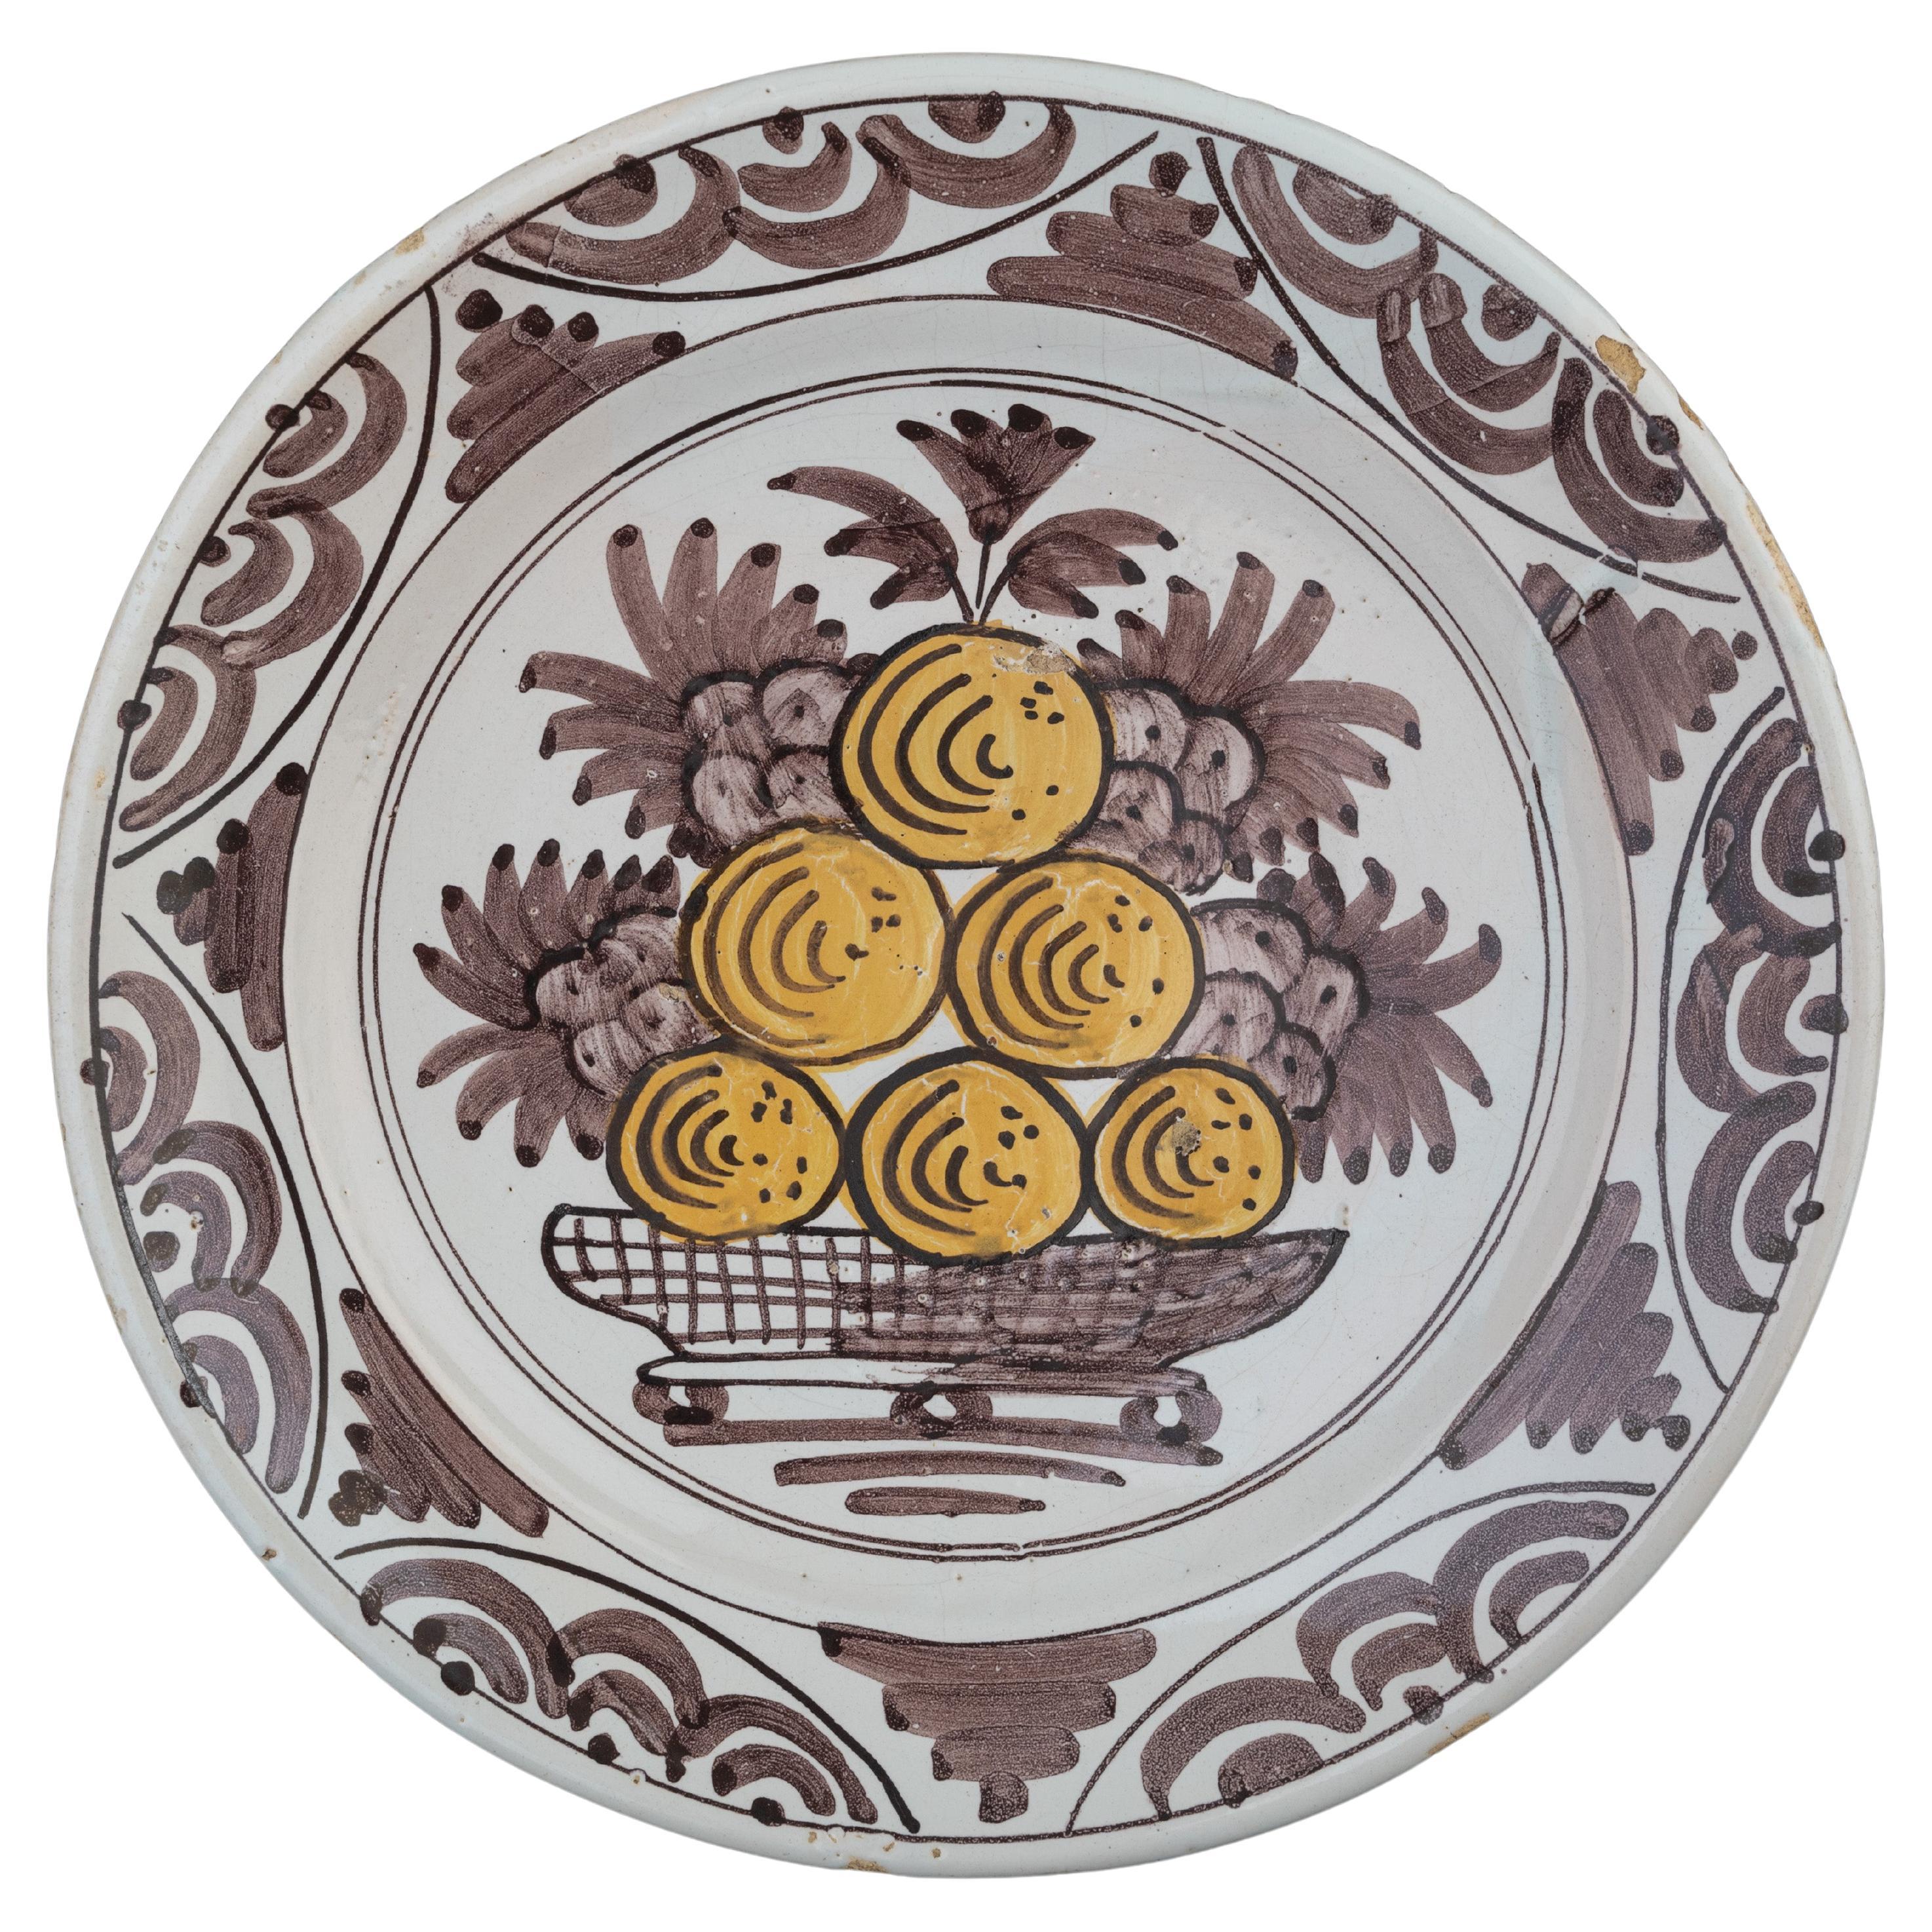 Delft Majolica Dish with Fruit in Purple and Yellow the Netherlands 1660-1700